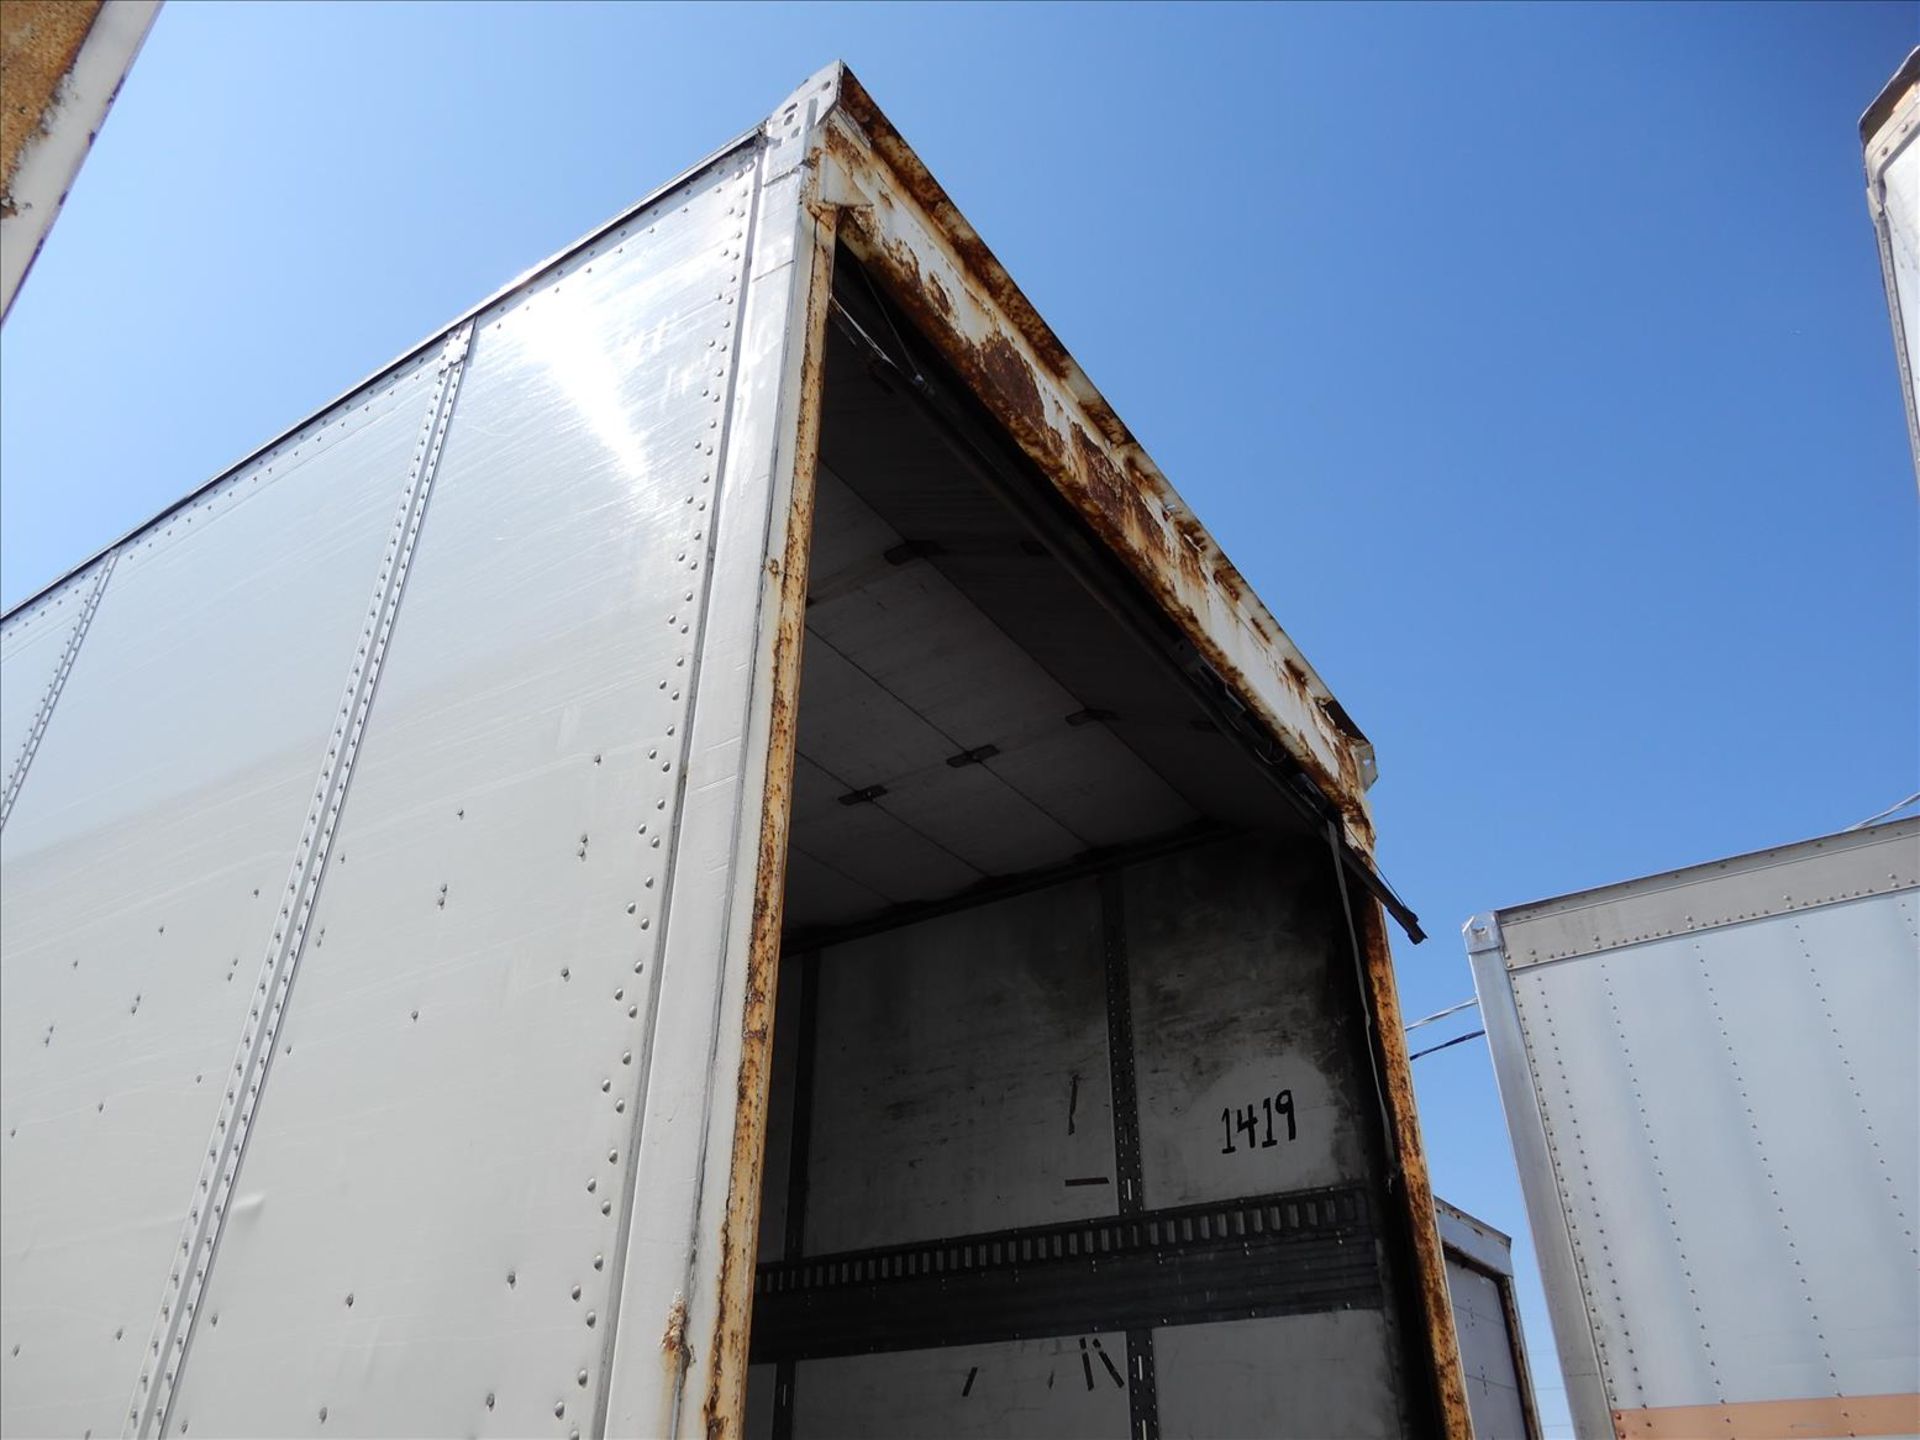 2012 Stoughton Trailer - Located in Indianapolis, IN - Image 16 of 27